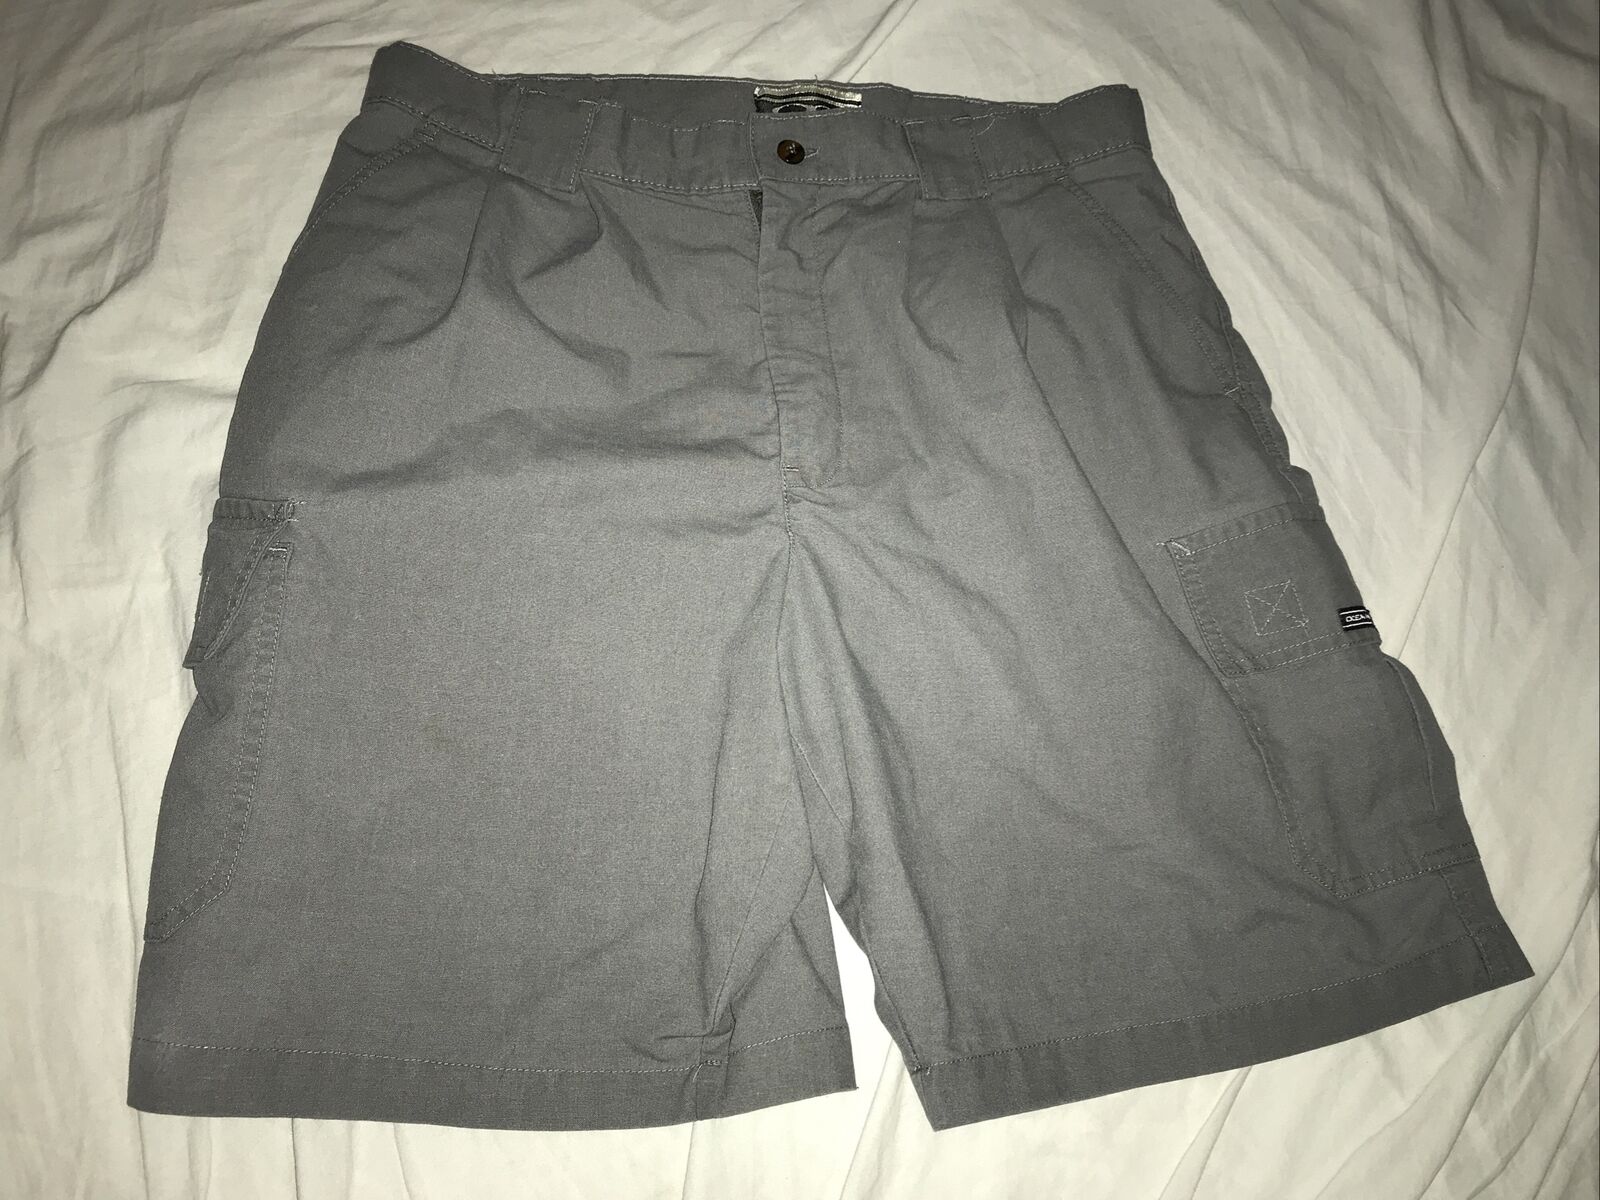 Vintage Ocean Pacific OP Surf Cotton Shorts Faded Grey Mens Missing Size Tag